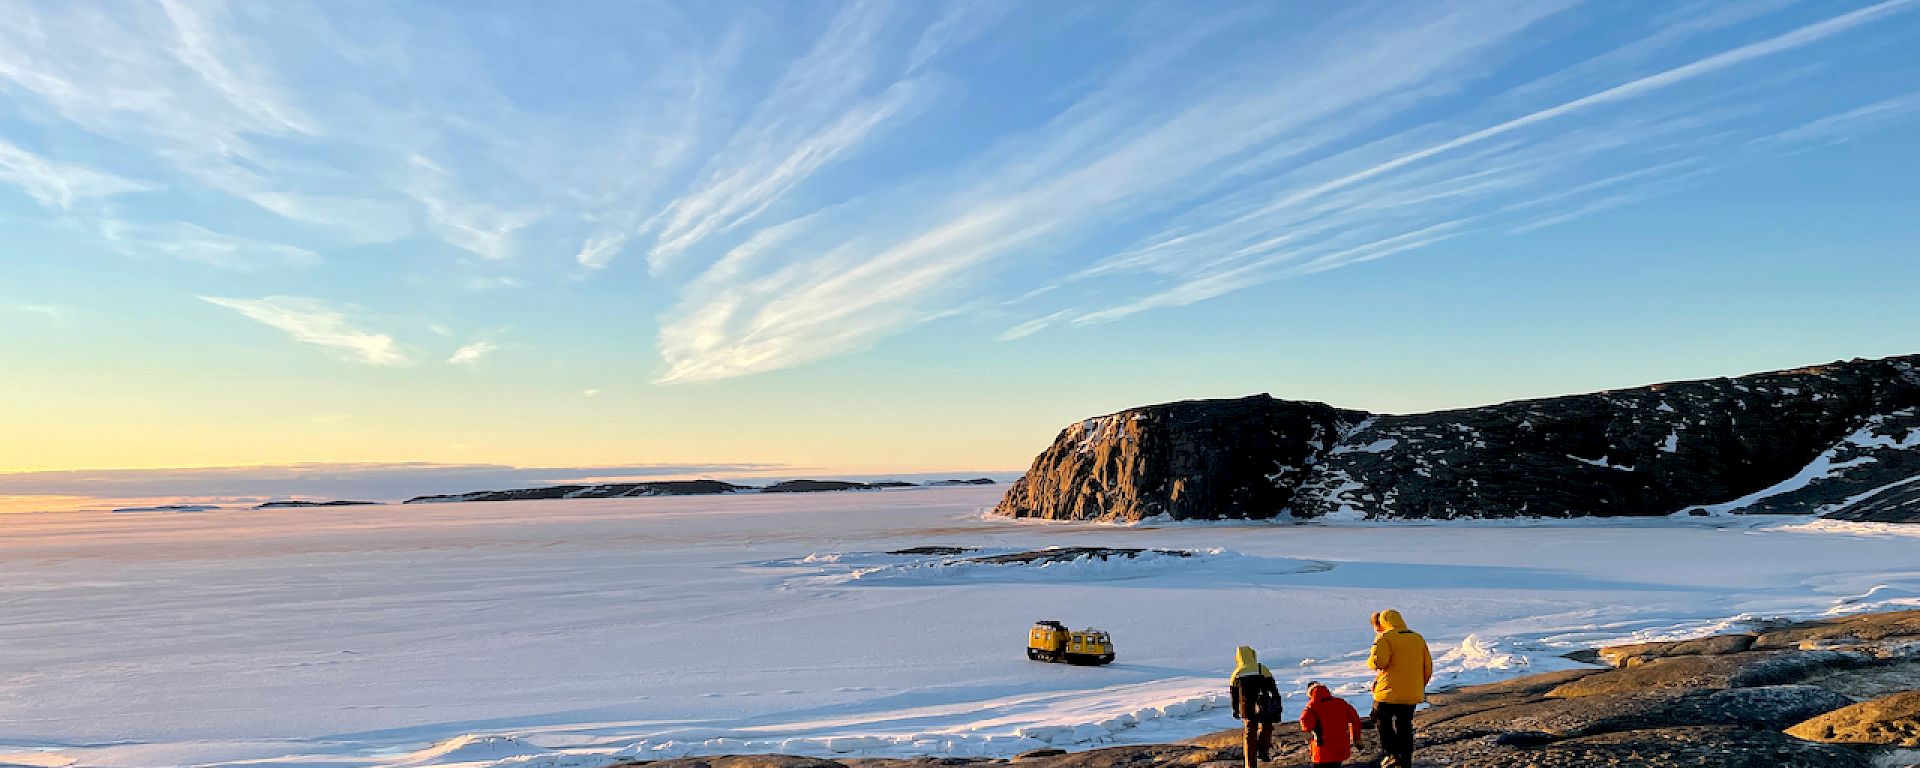 Three expeditioners walk down some rocks towards a large expanse of sea ice. A yellow Hagglund vehicle can be seen parked out on the ice.